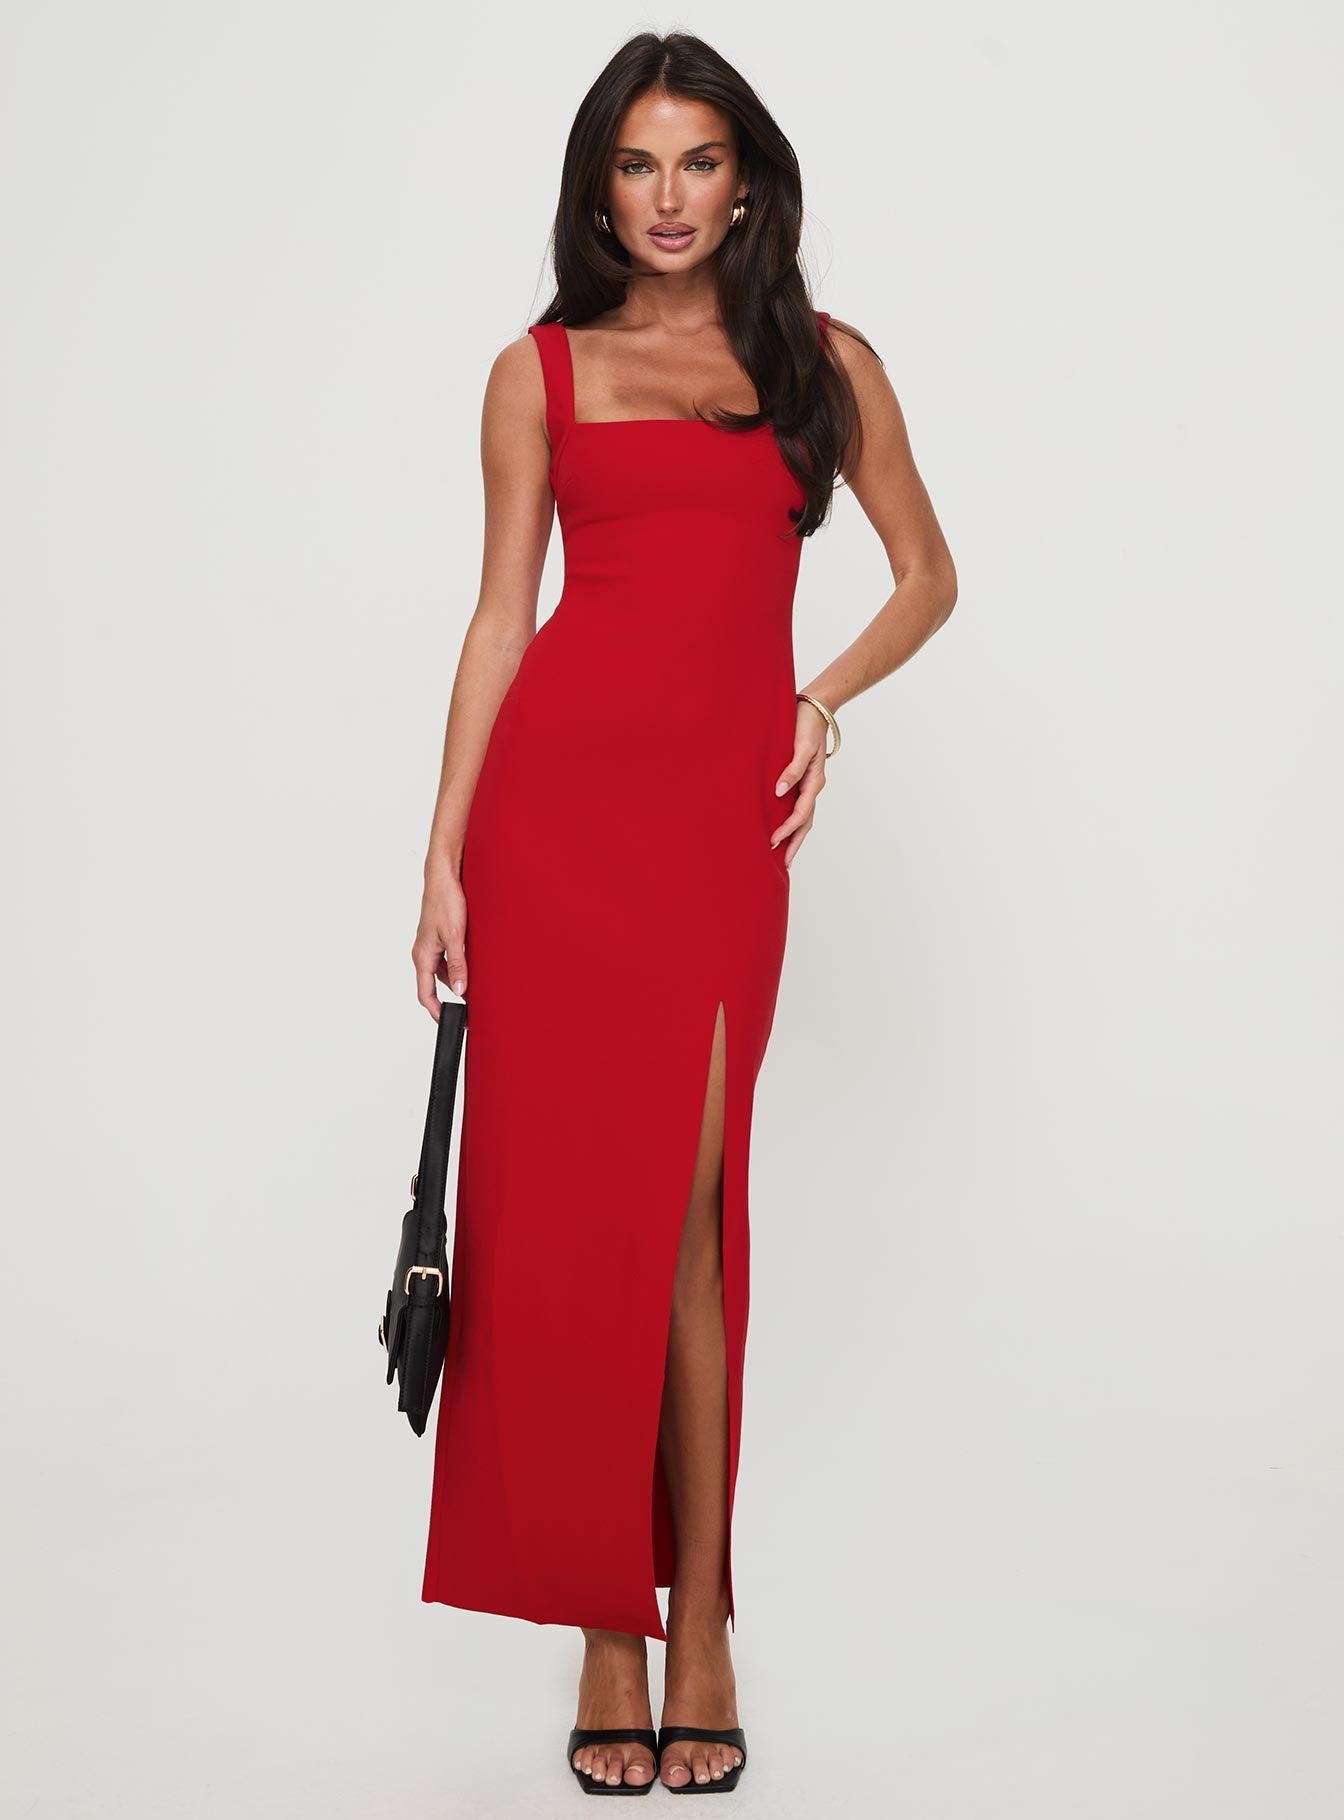 Shop Formal Dress - Bombshell Maxi Dress Red fifth image